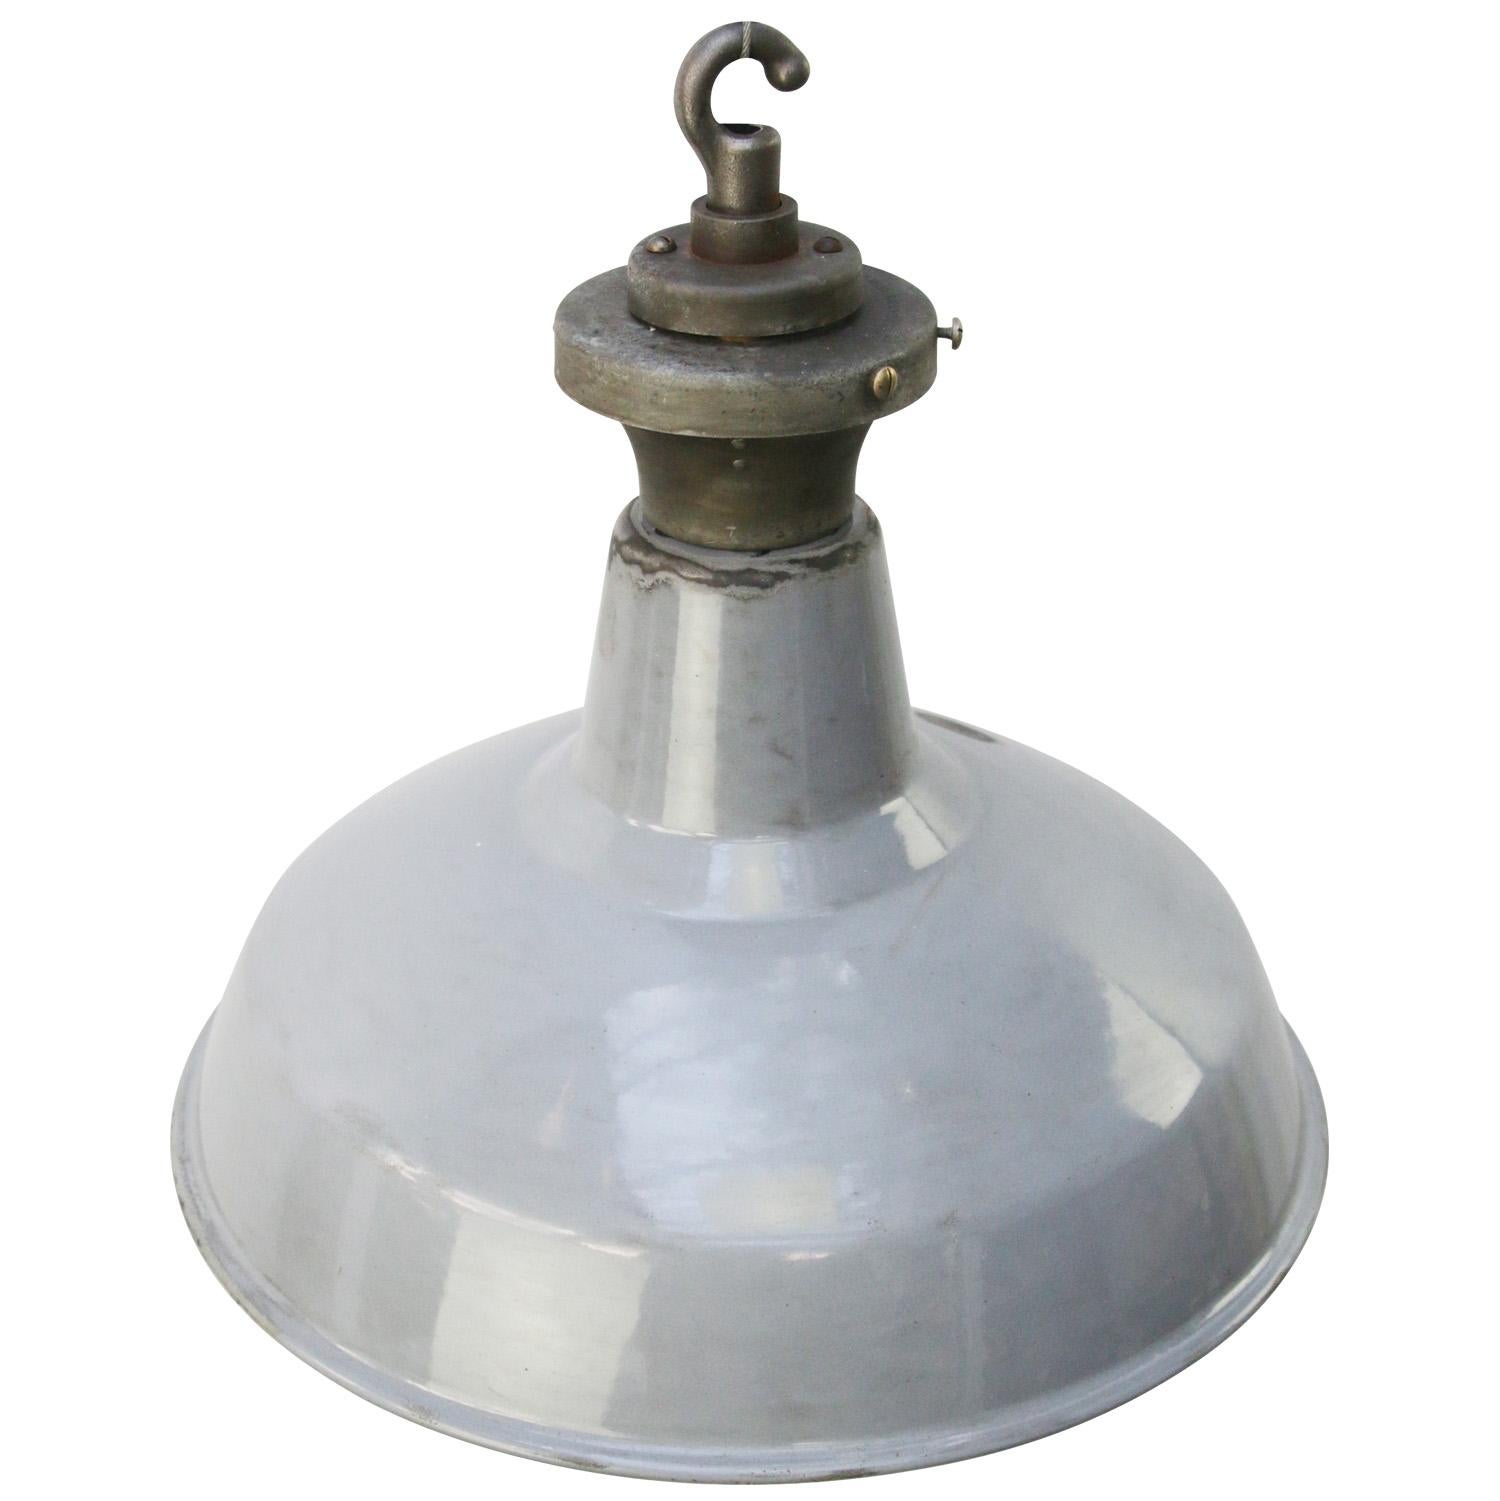 English vintage industrial classic. 
Gray enamel white interior. 

Weight: 1.80 kg / 4 lb

Priced per individual item. All lamps have been made suitable by international standards for incandescent light bulbs, energy-efficient and LED bulbs.